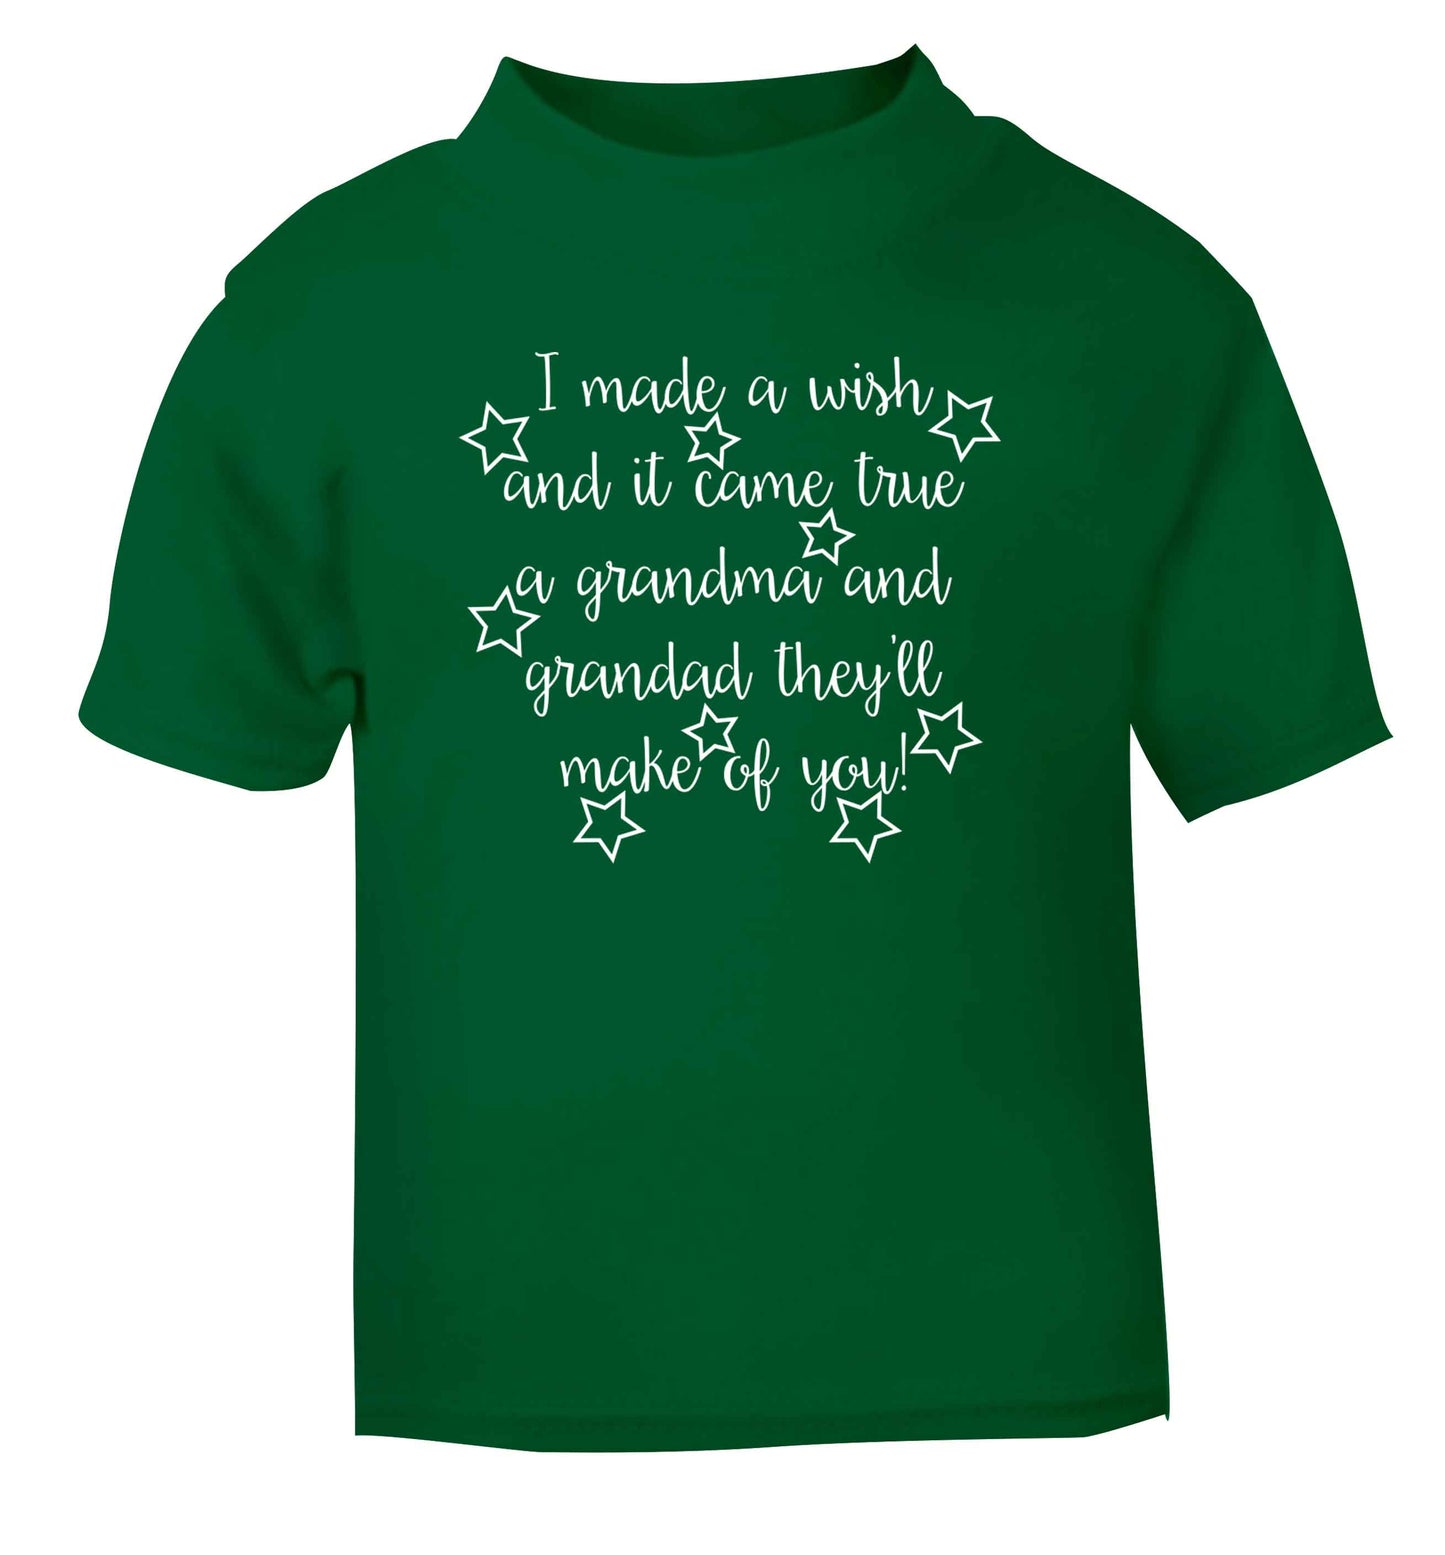 I made a wish and it came true a grandma and grandad they'll make of you! green Baby Toddler Tshirt 2 Years